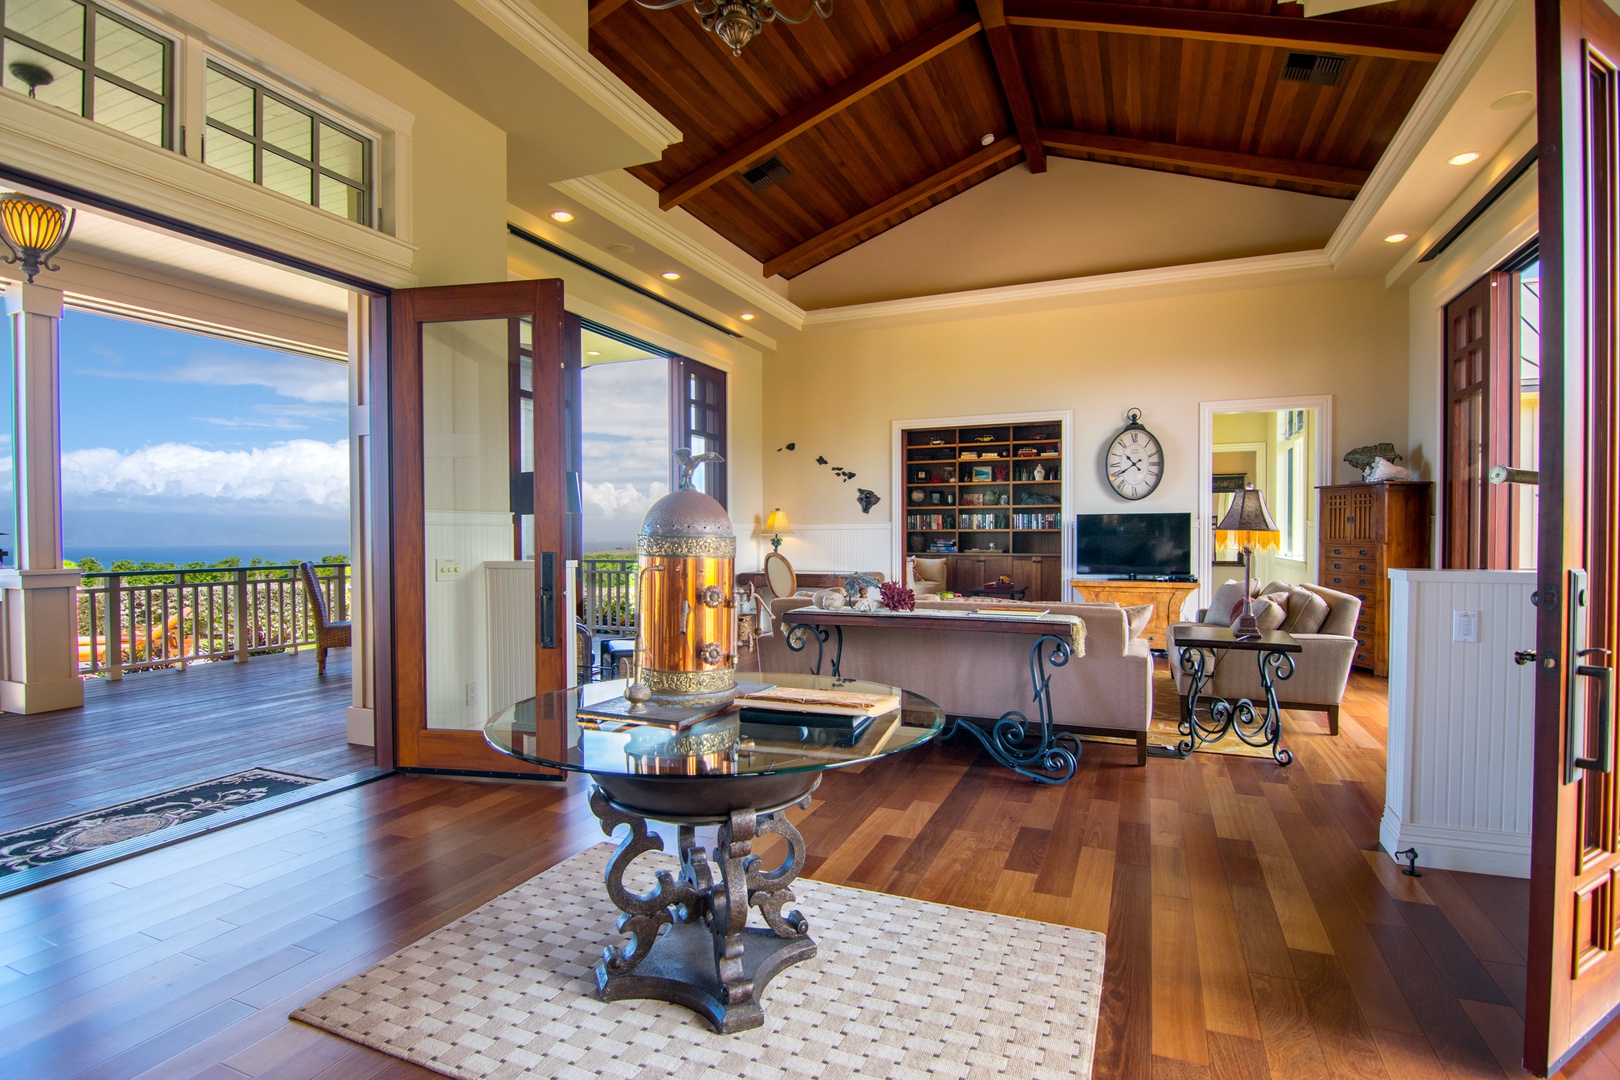 Lahaina Vacation Rentals, Rainbow Hale Estate* - View from Dinig Roon to Living Room with High Ceilings and Custom Decor